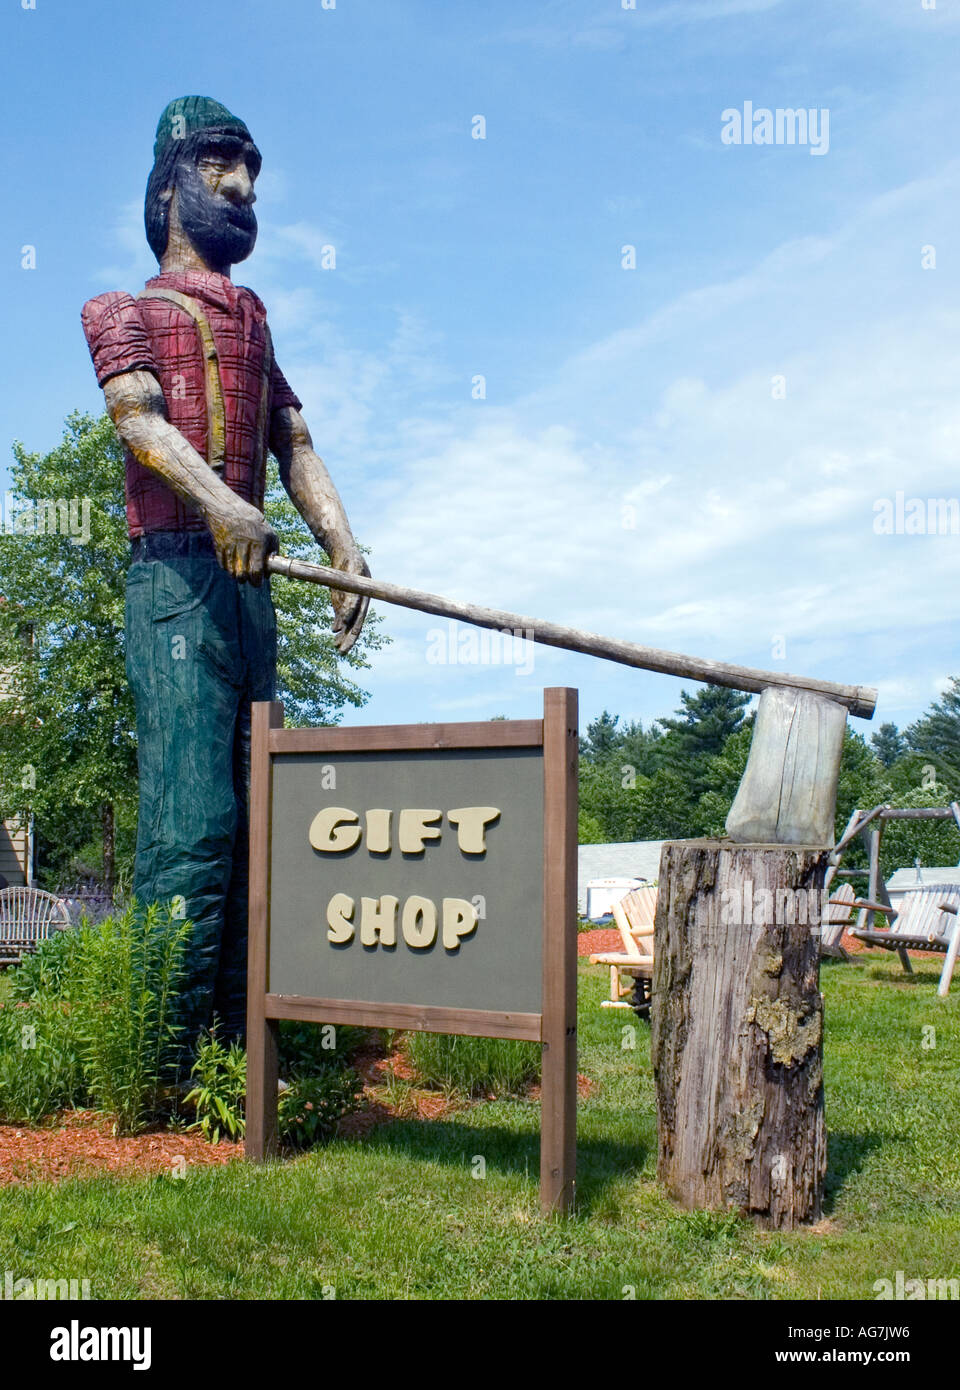 Paul Bunyan with axe wood carving statue at a gift shop in Bellingham Massachusetts Stock Photo